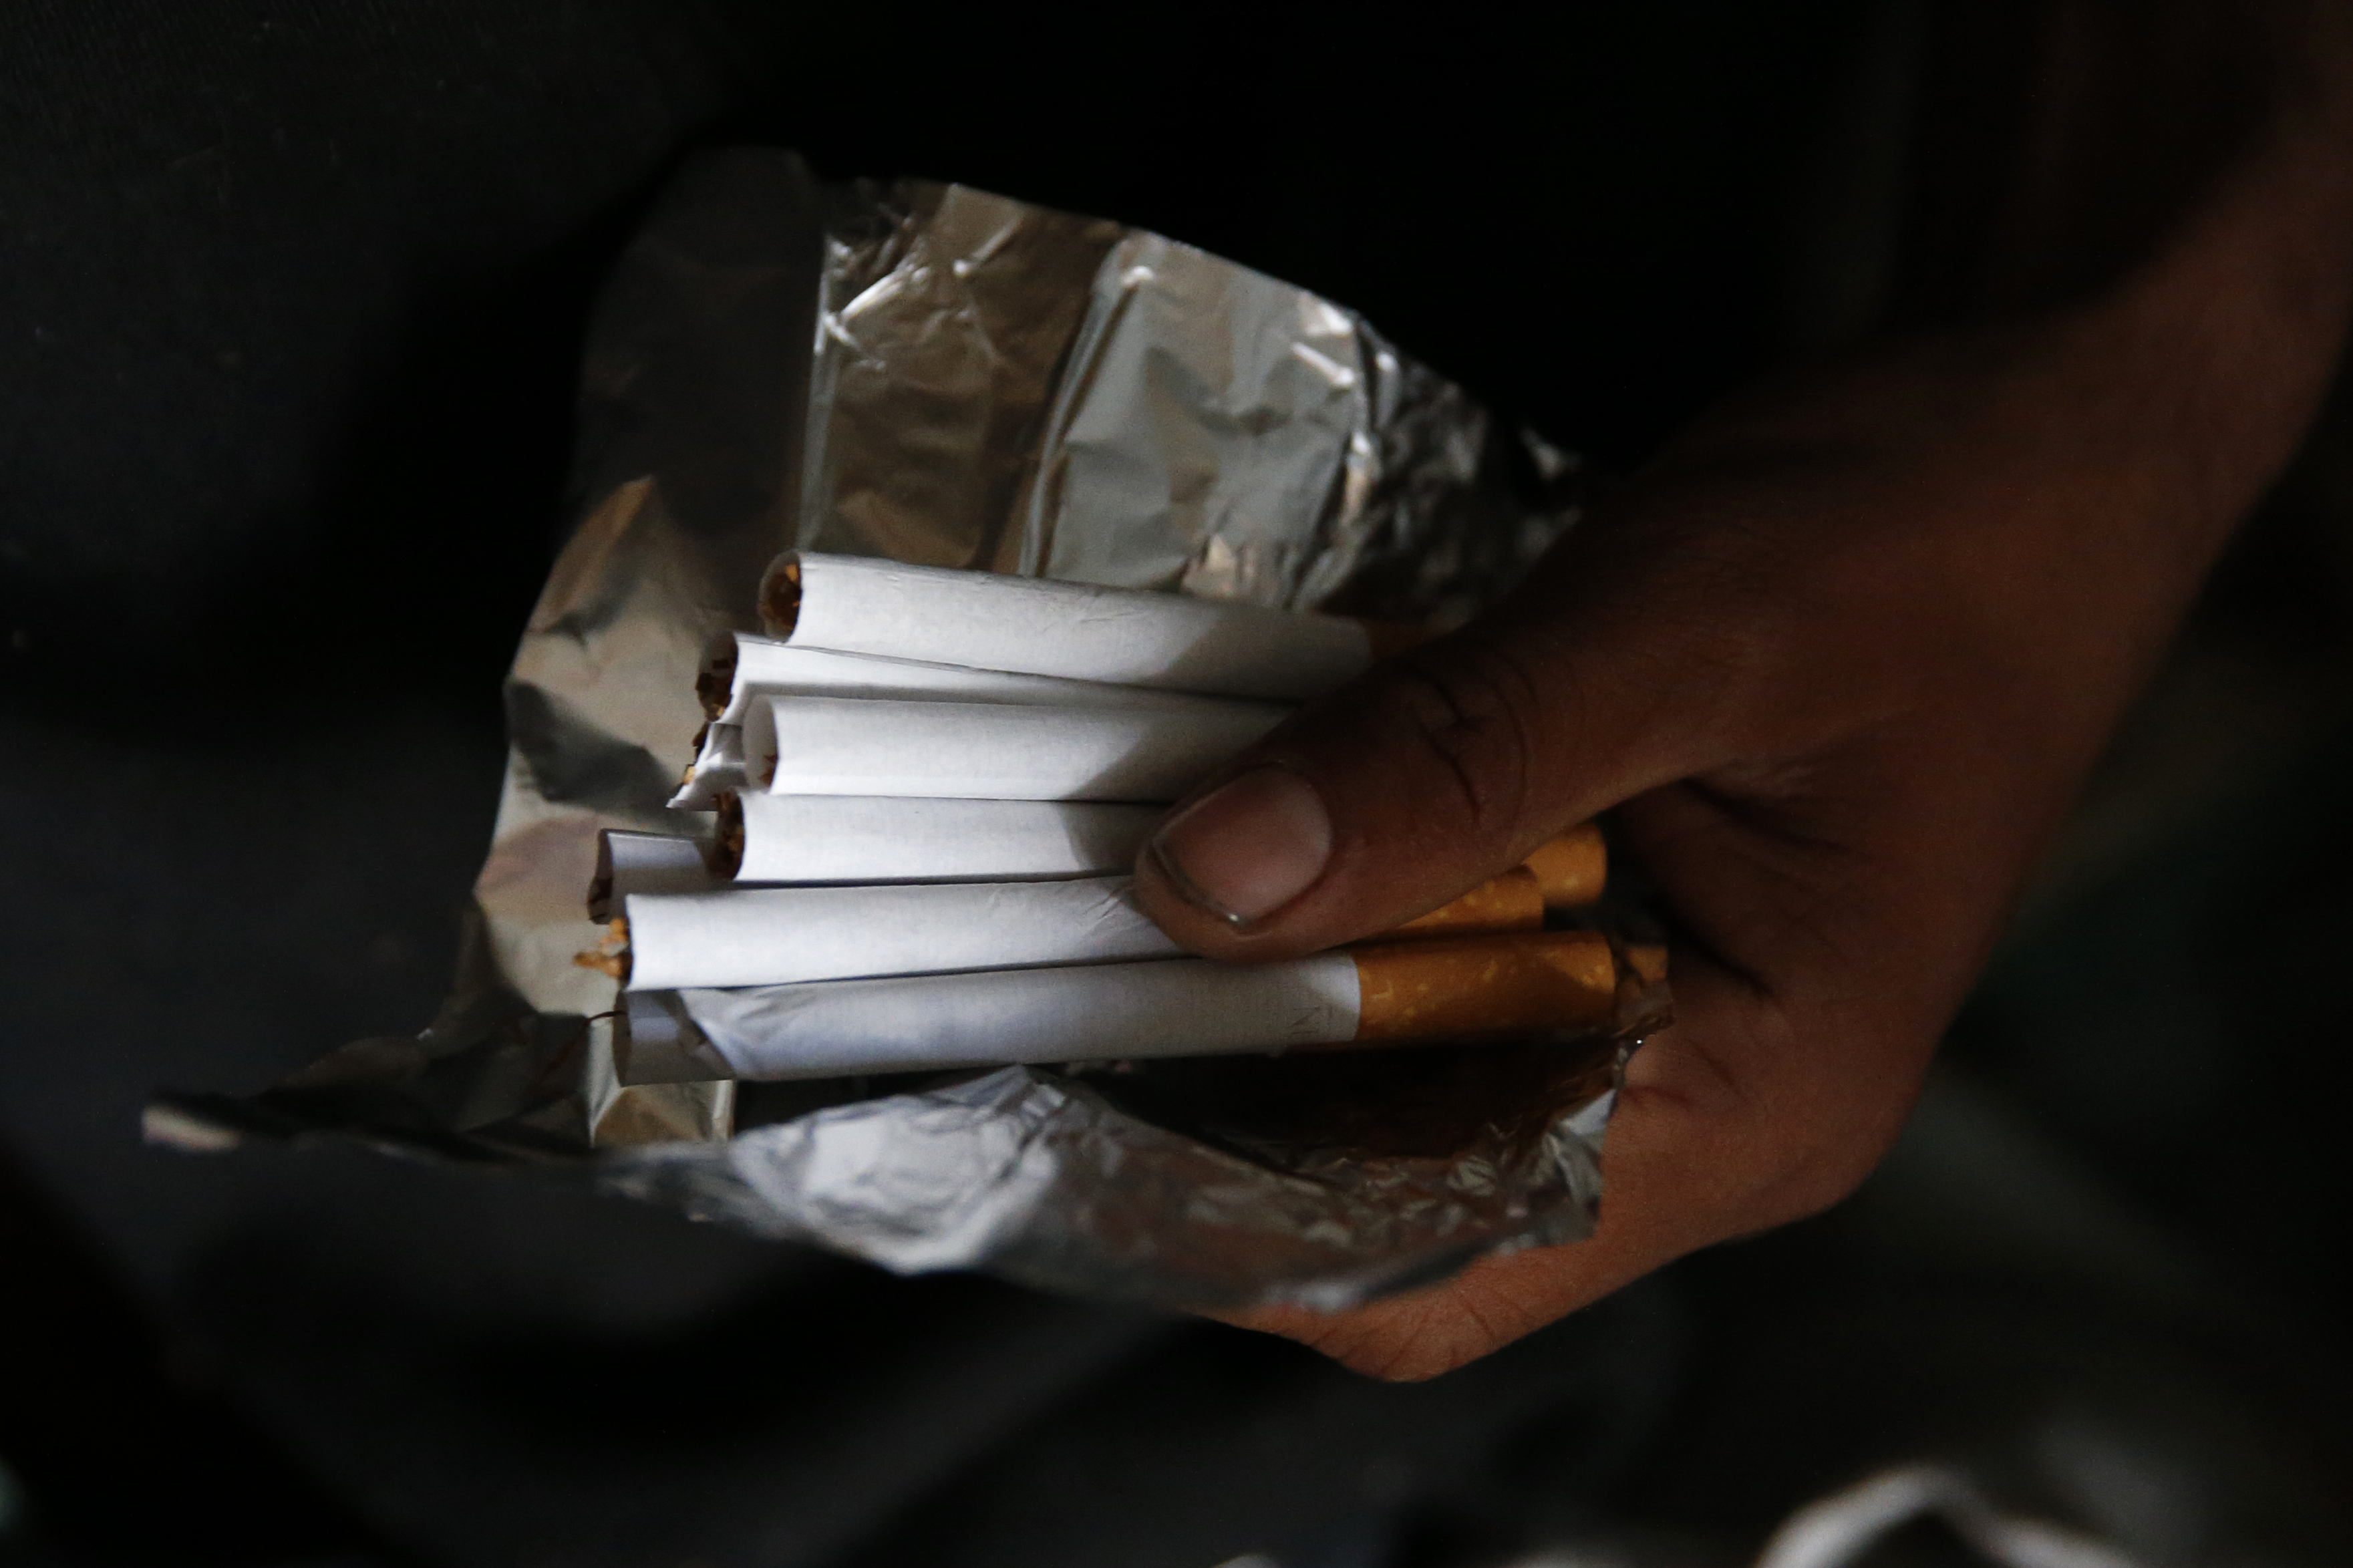 A migrant displays cigarettes which he rolled to be sold in a makeshift tent city located in a field in Calais